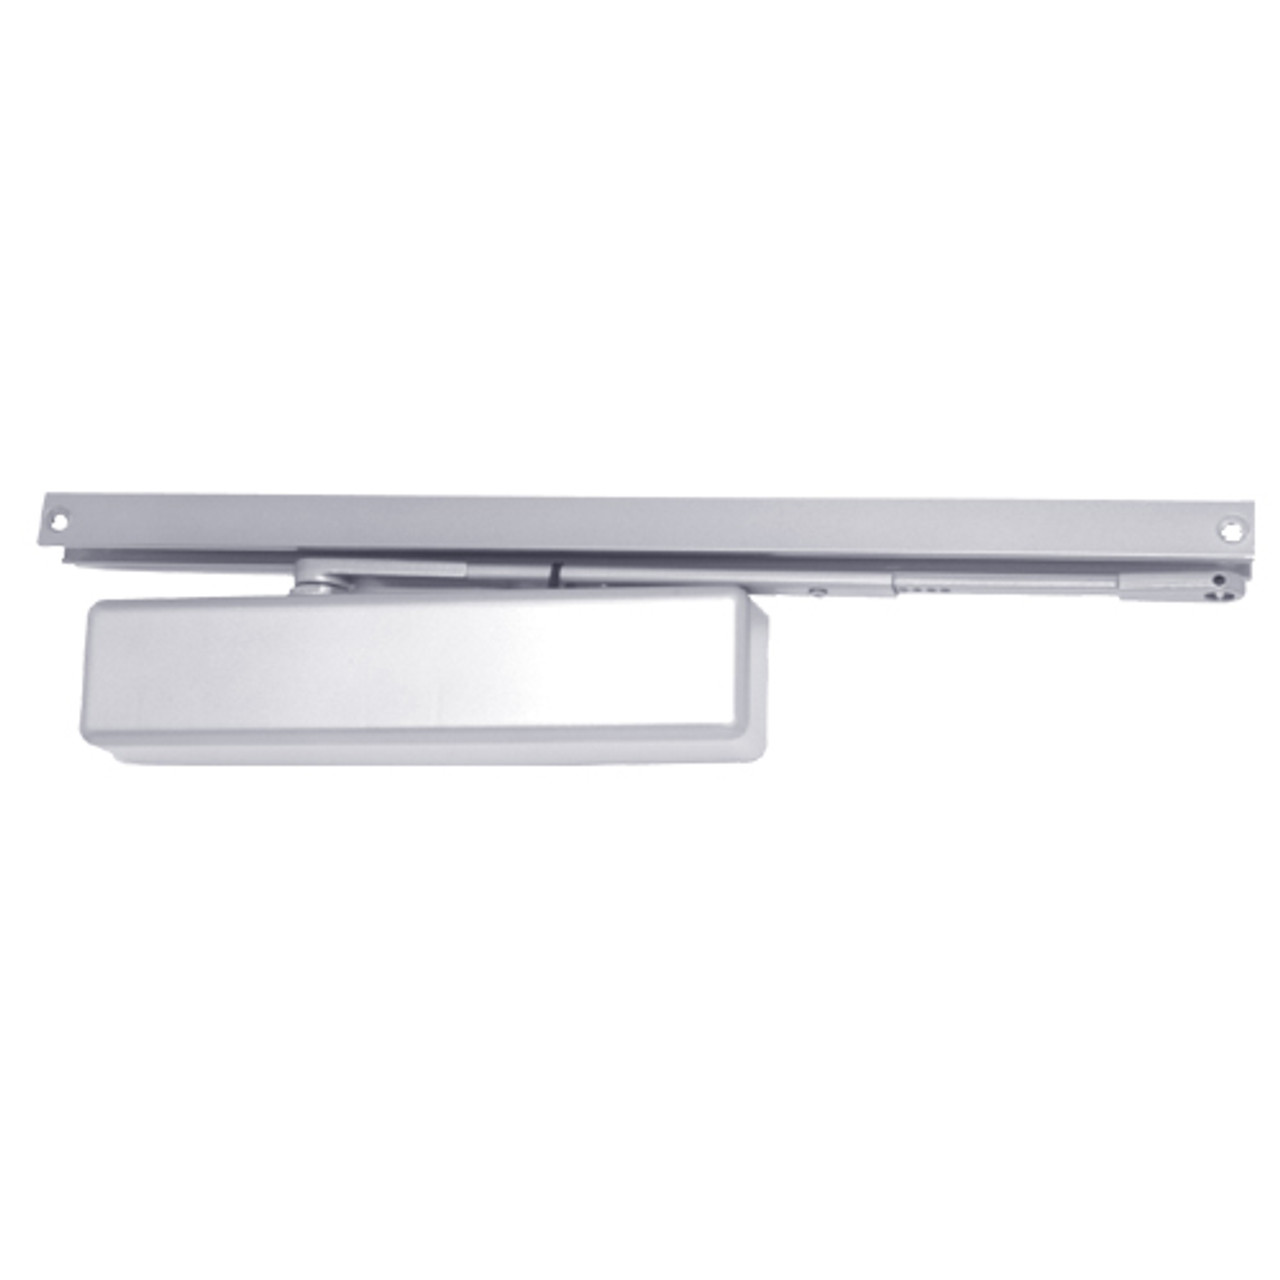 1461T-BUMPER-US26 LCN Surface Mount Door Closer with Bumper Arm in Bright Chrome Finish